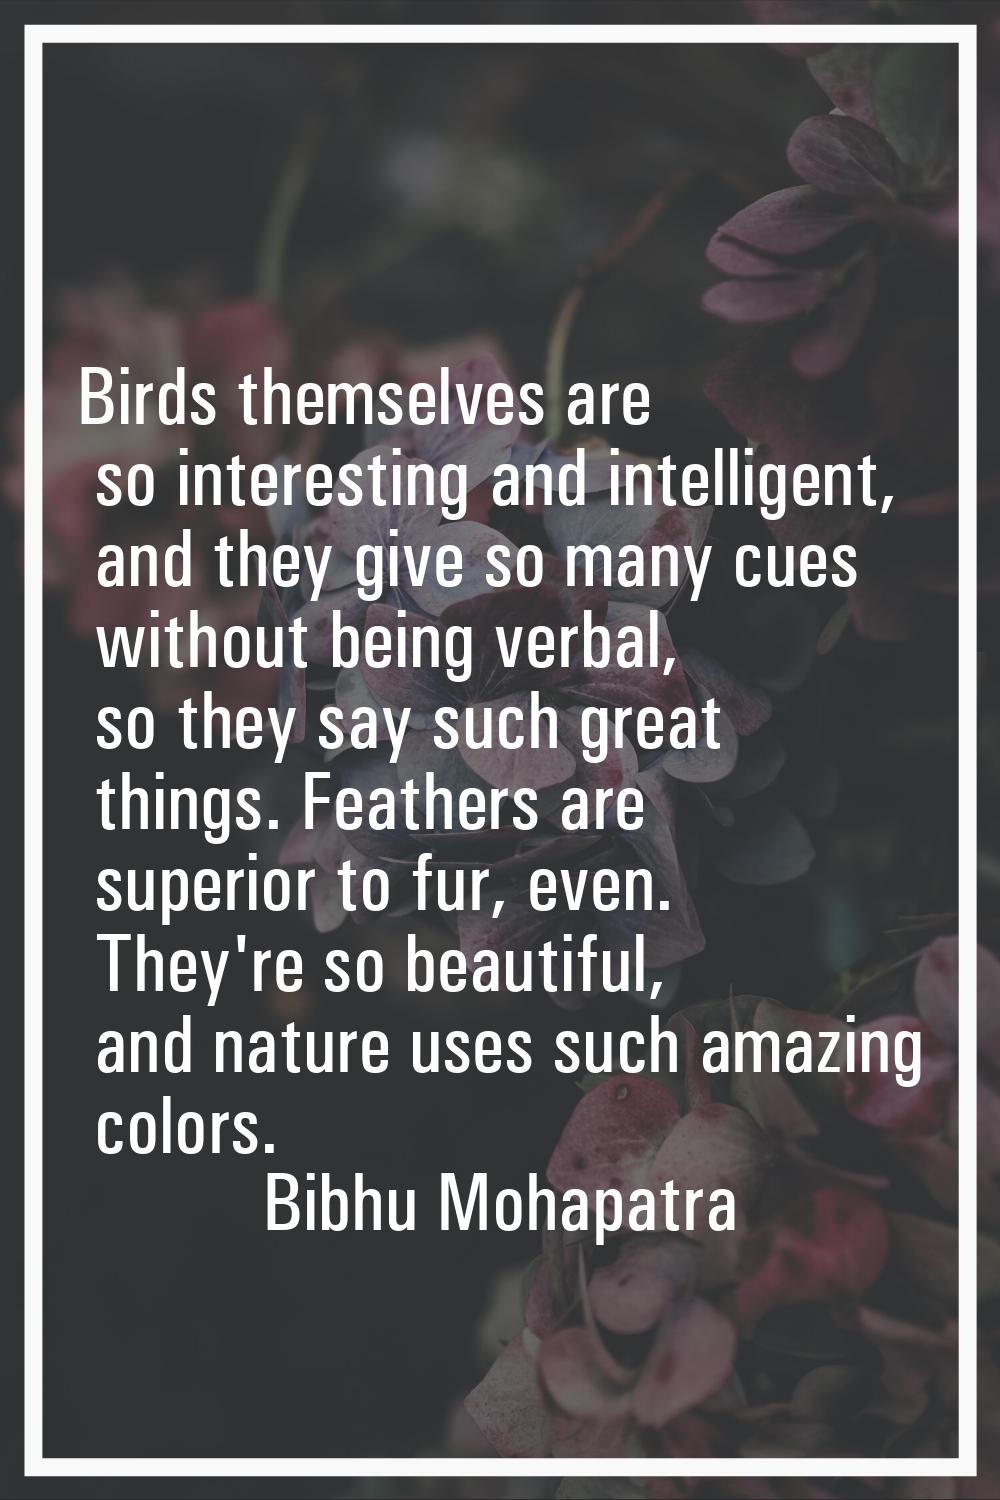 Birds themselves are so interesting and intelligent, and they give so many cues without being verba